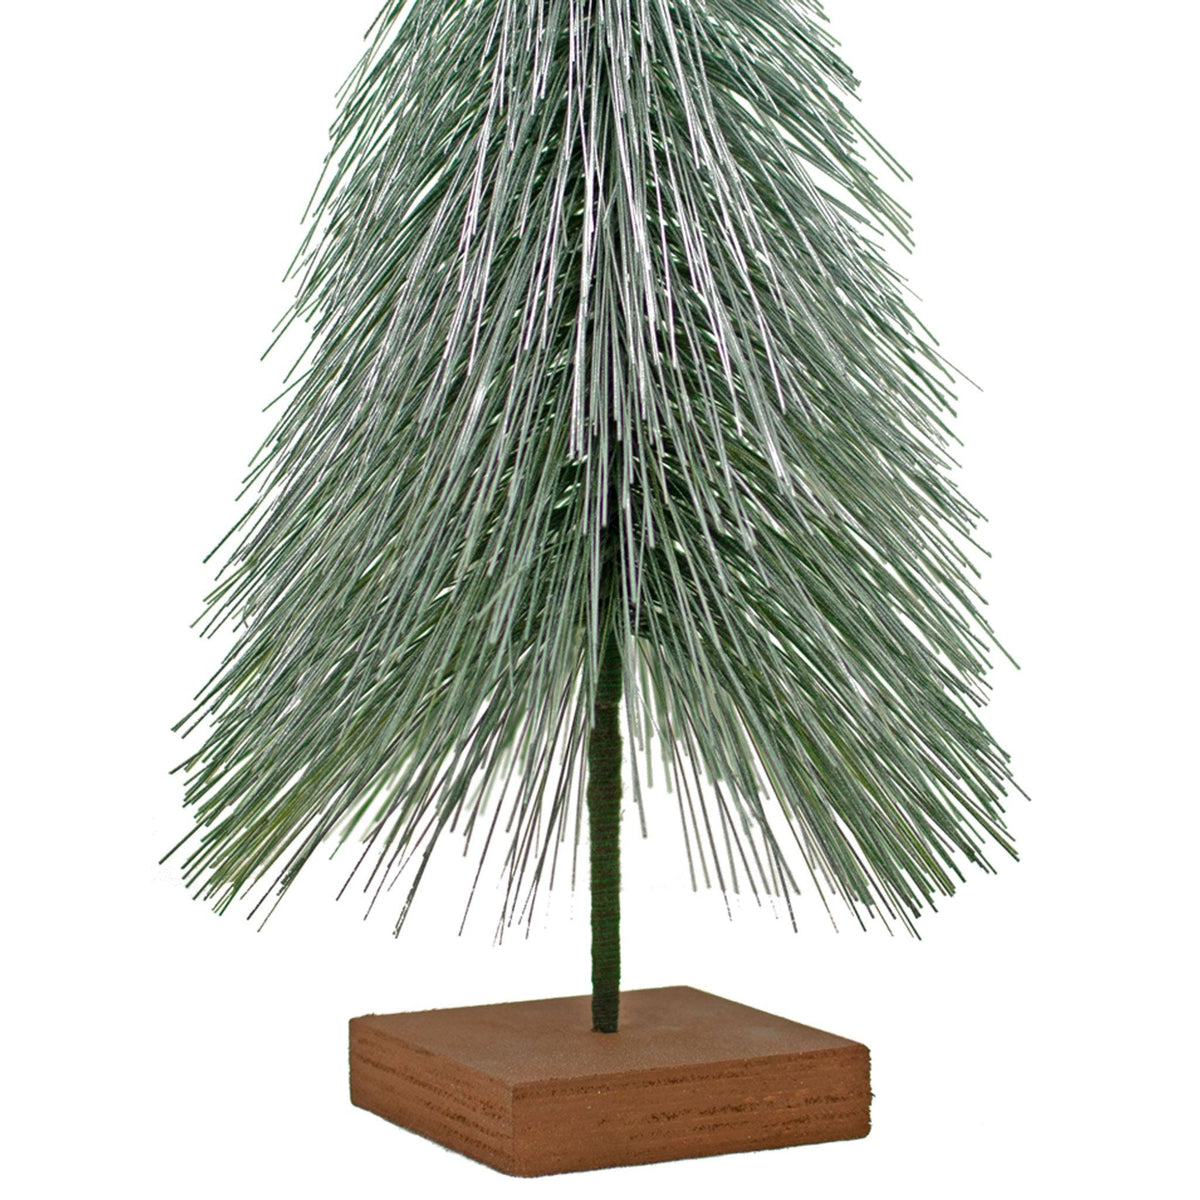 Mini Alpine Green Bottlebrush trees come with a wooden stand painted brown